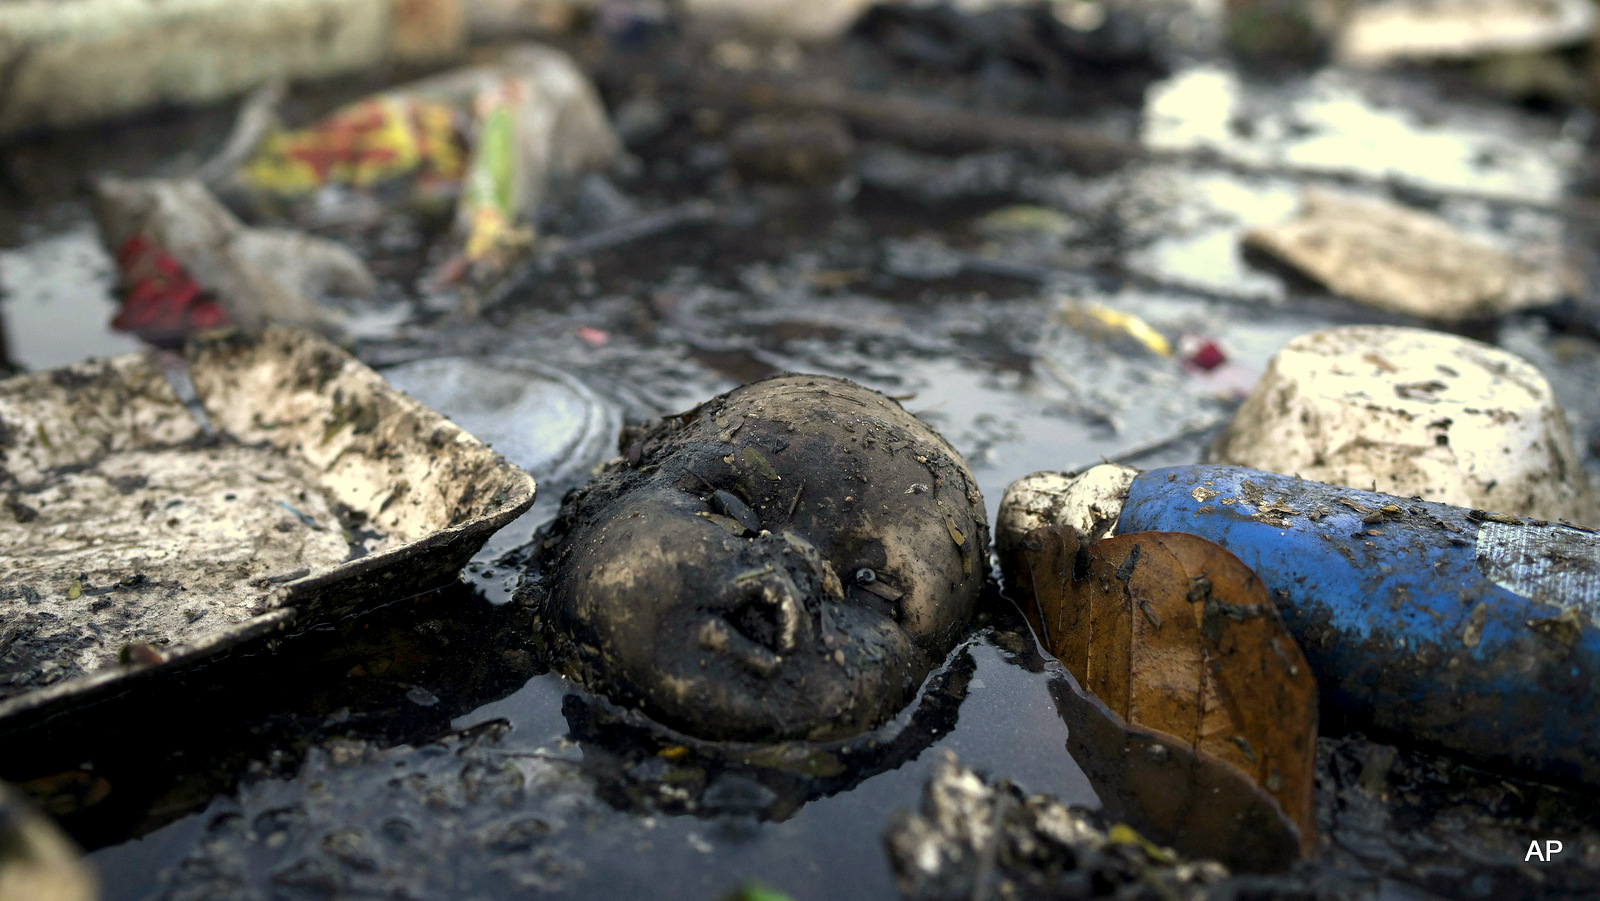 A doll's head floats in the polluted waters of a canal at the Mare slum complex in Rio de Janeiro, Brazil